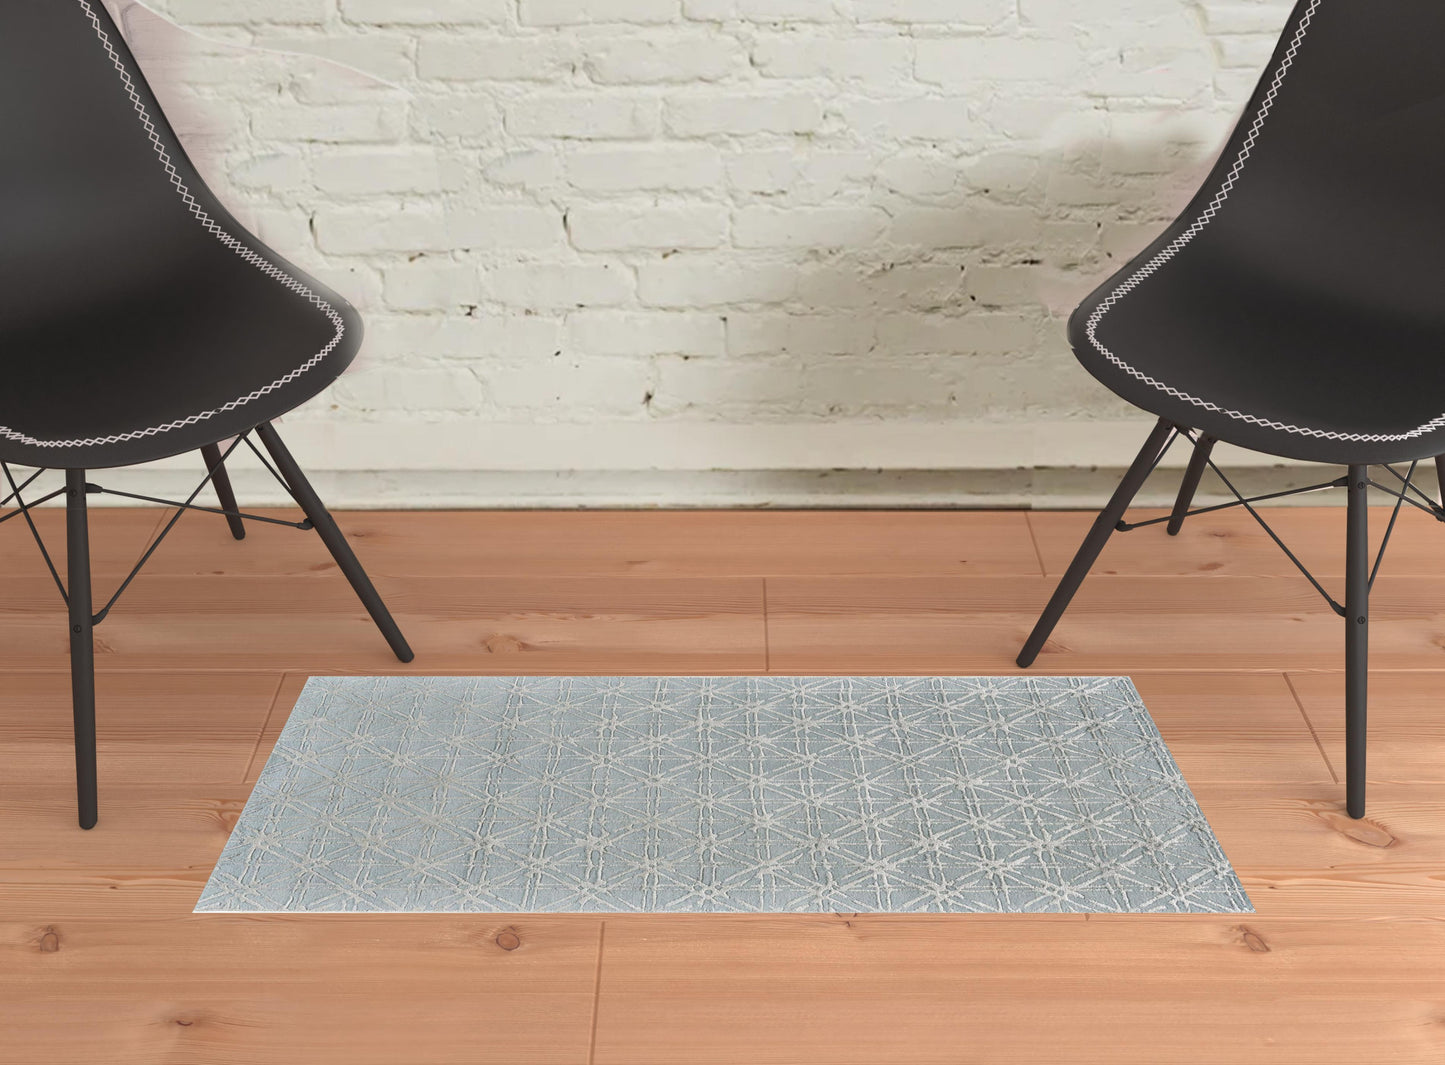 2' X 3' Blue Silver And Gray Wool Abstract Tufted Handmade Area Rug